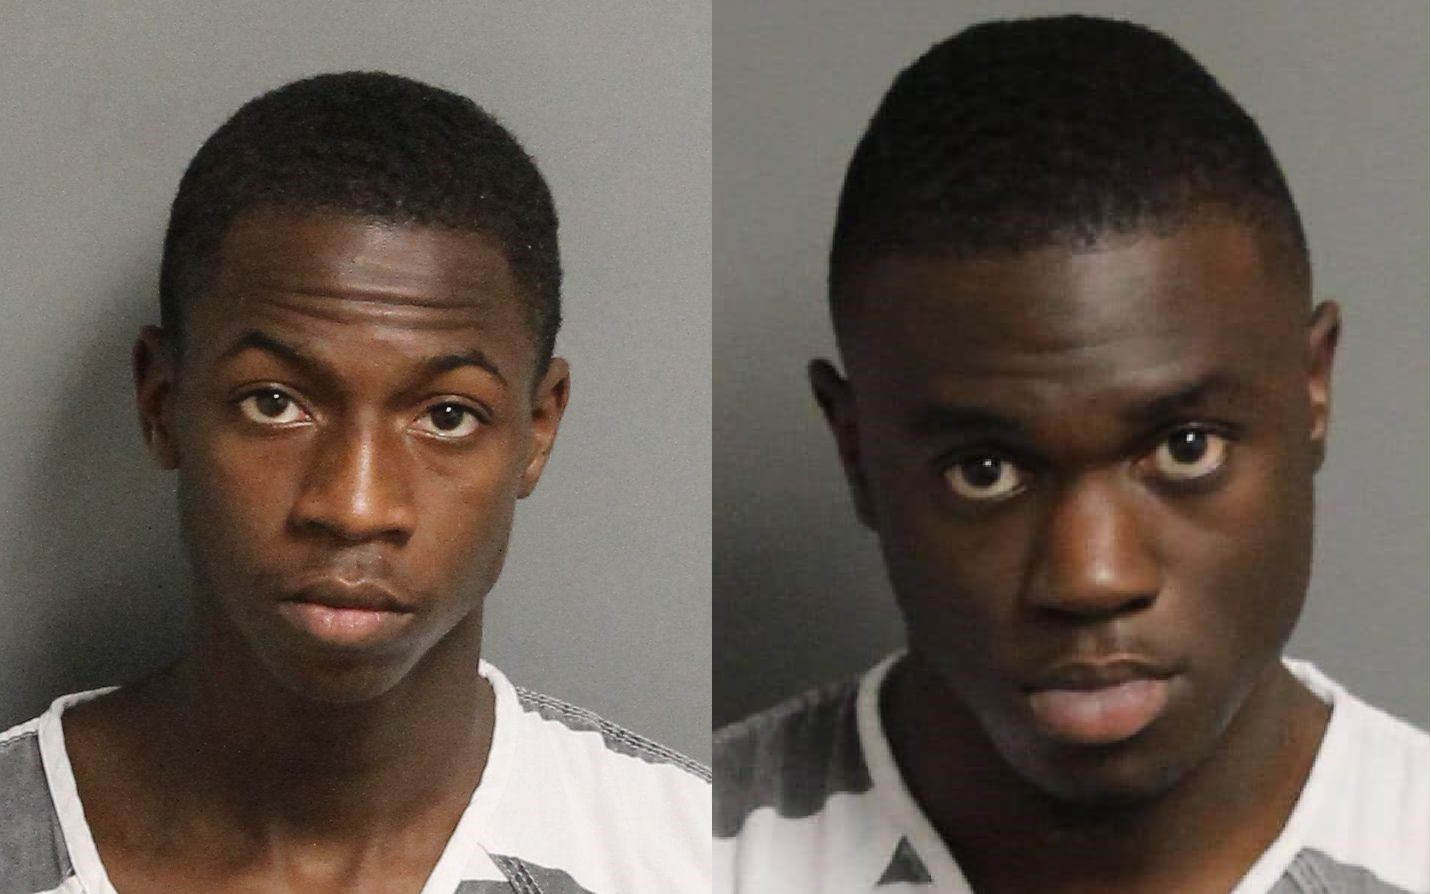 Second suspect arrested in Riverchase Galleria parking deck shooting death